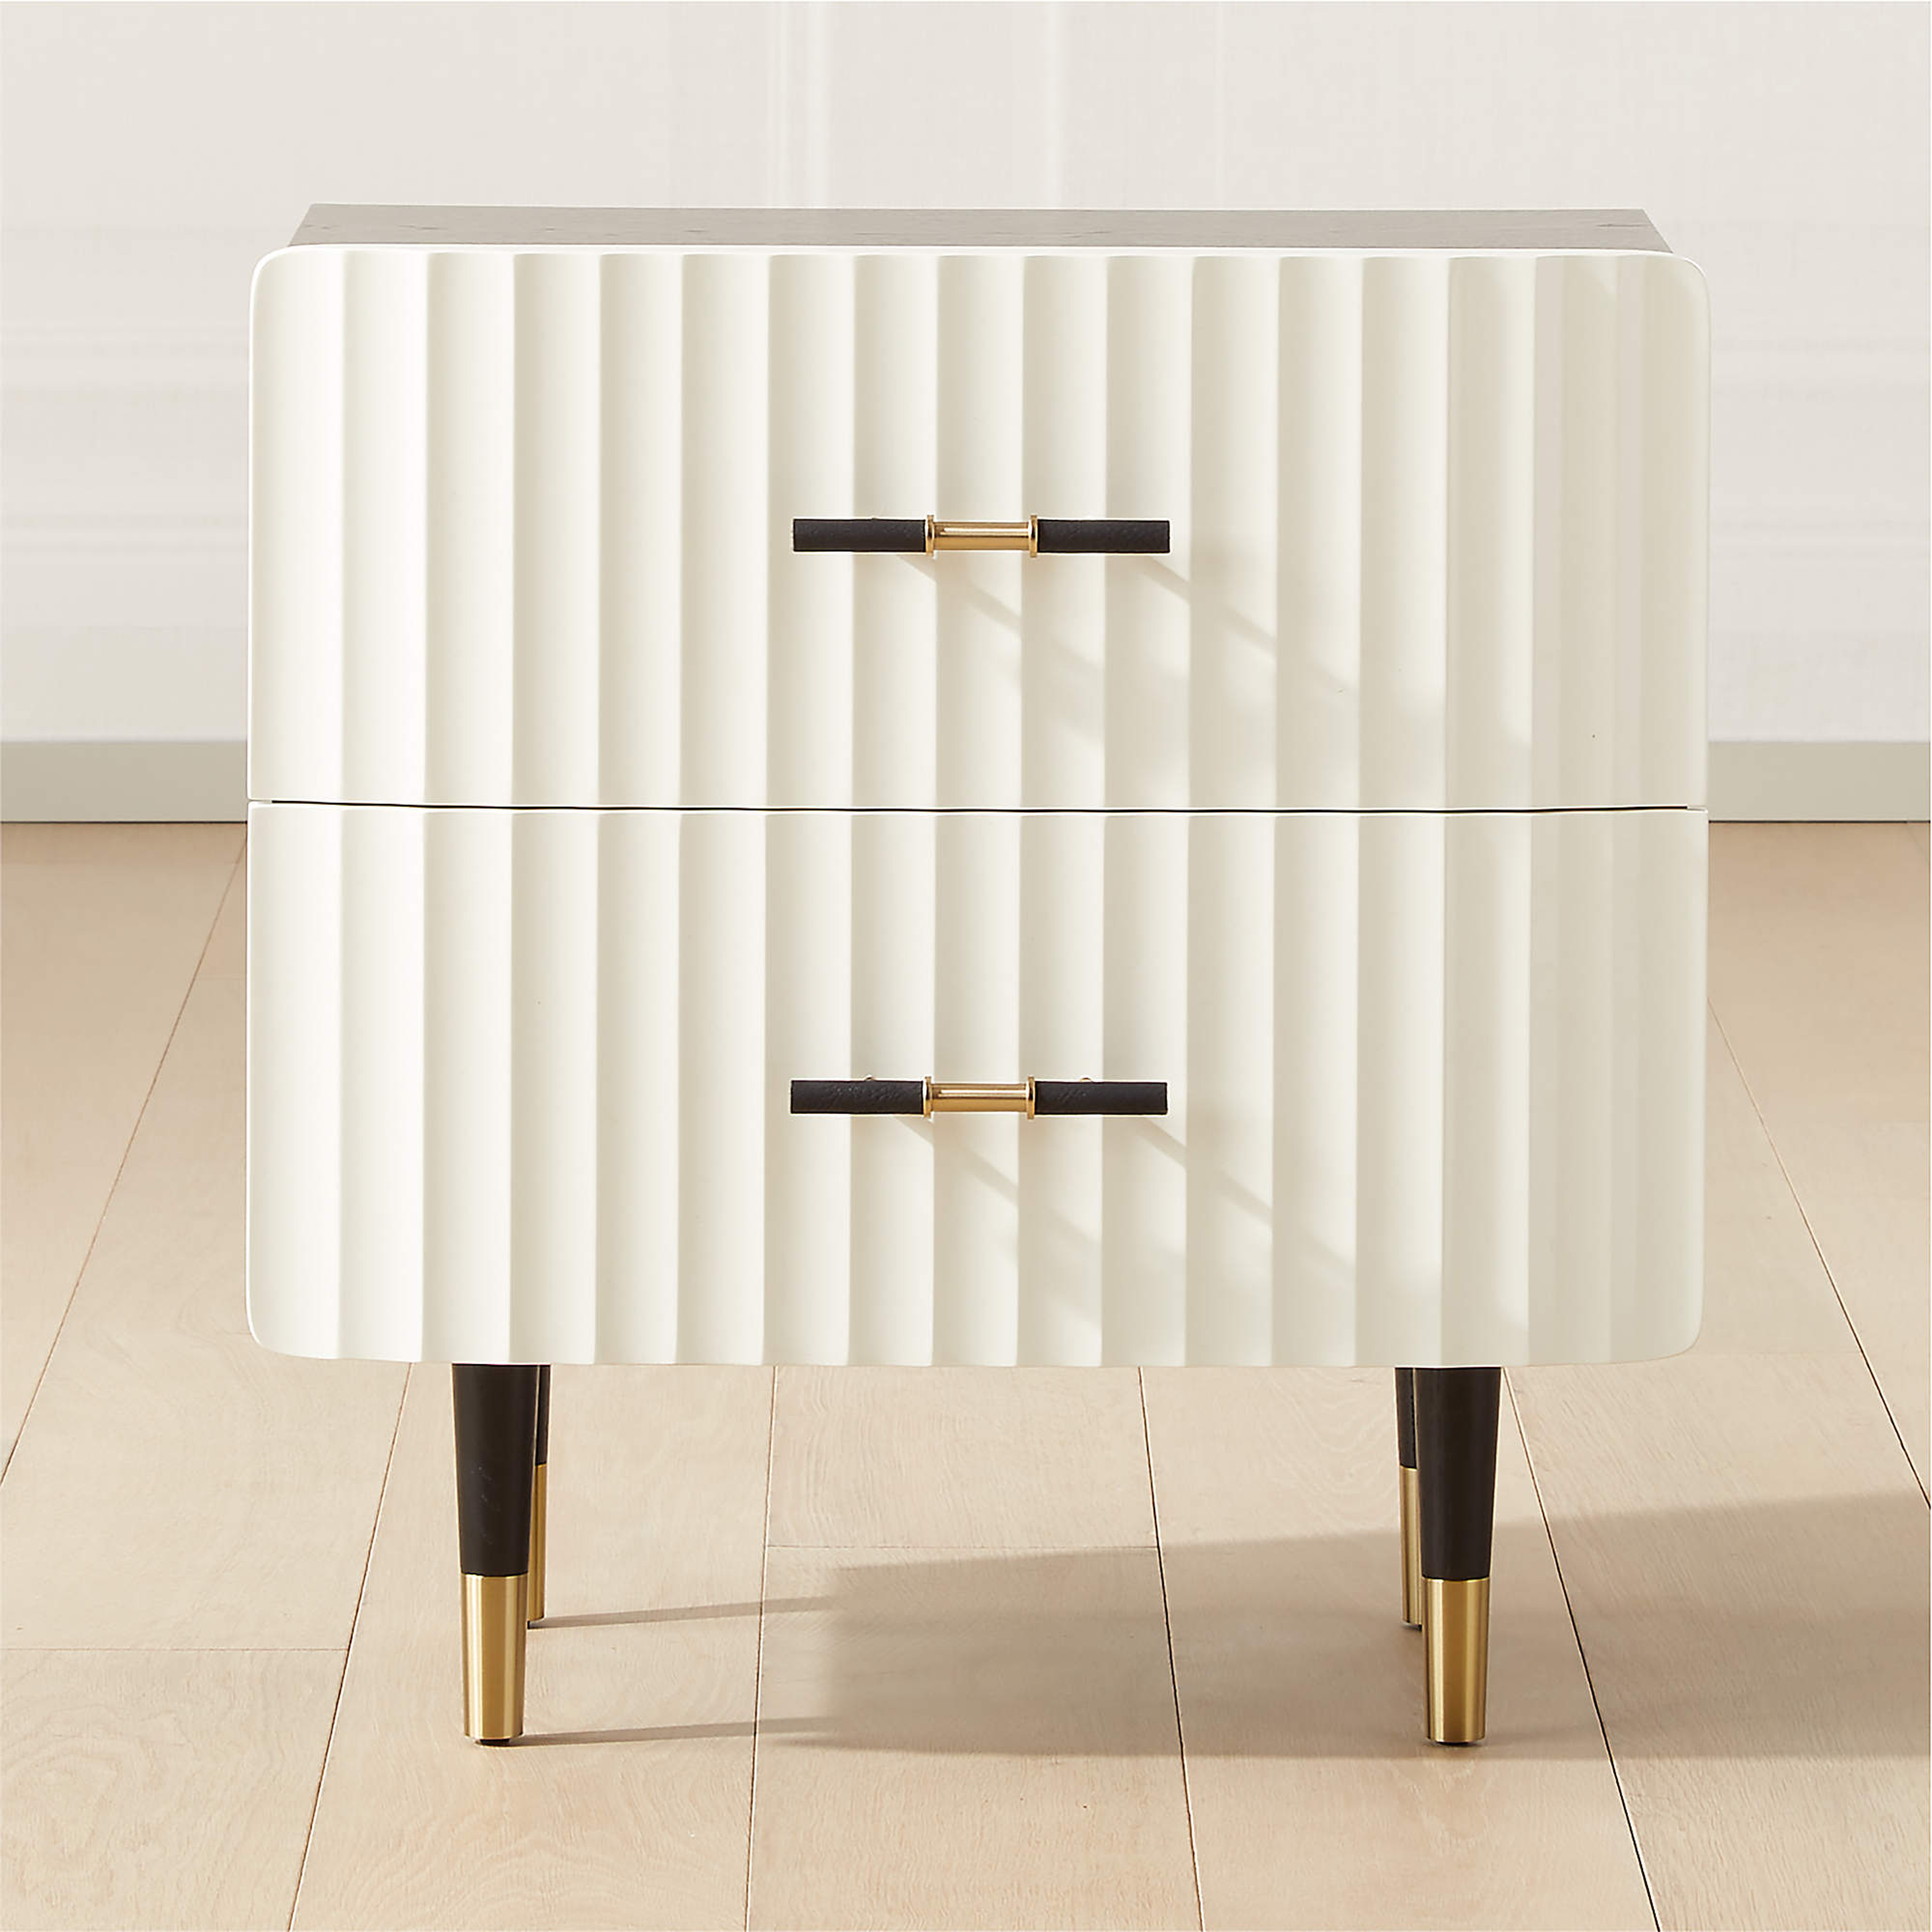 Crimped Nightstand - CB2